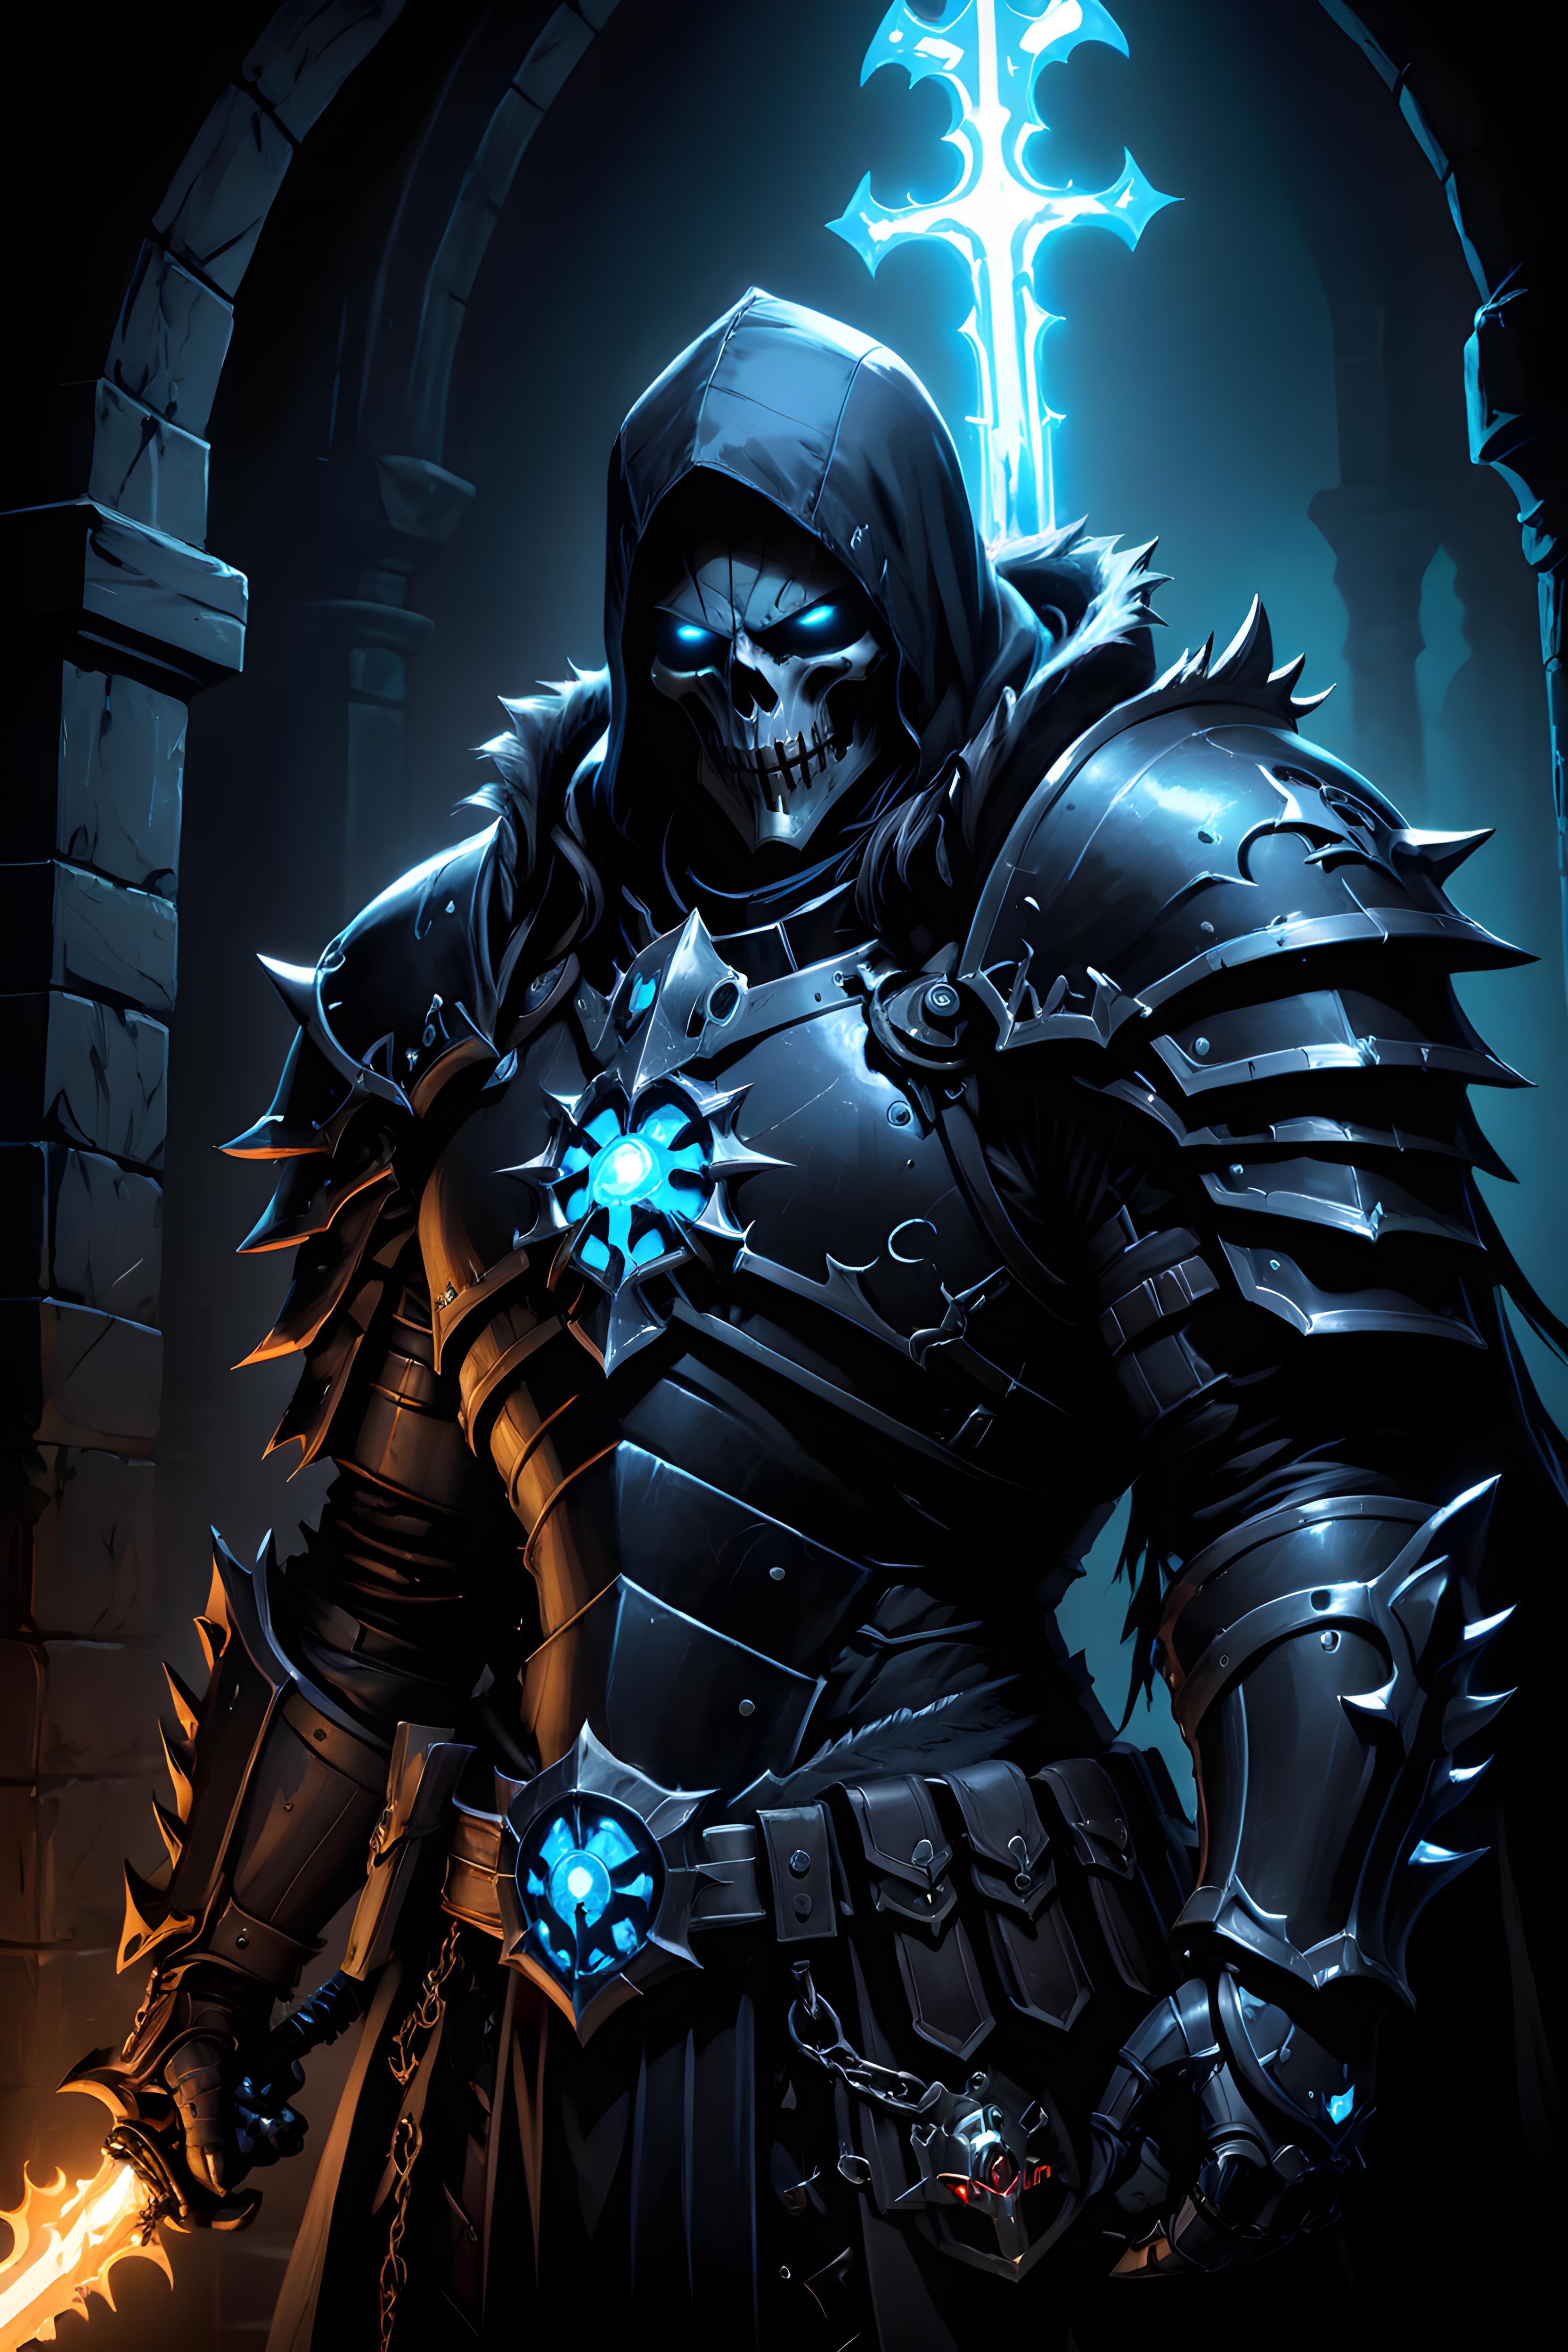 A skeleton warrior wearing blue eyes and holding a sword, standing in a dark environment.